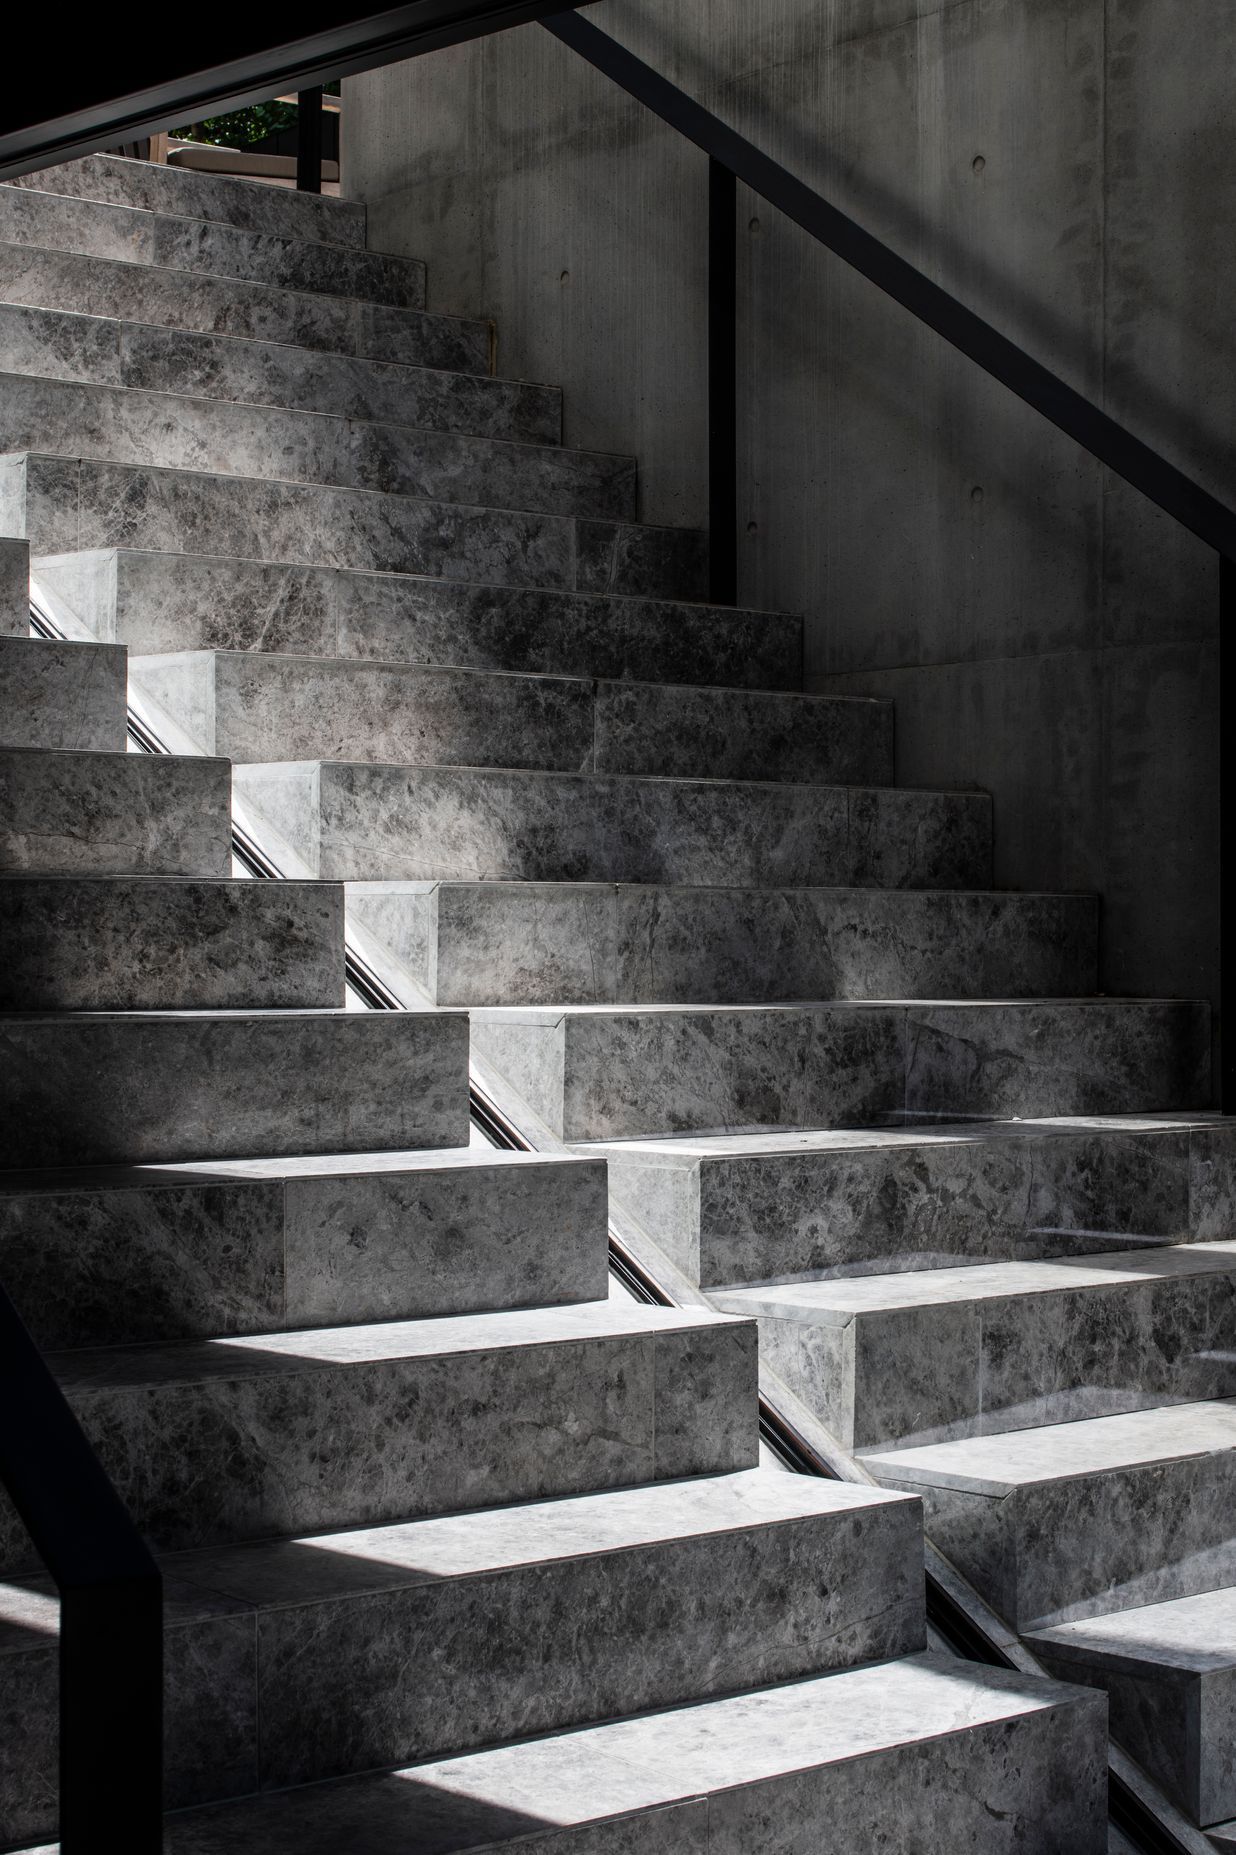 The precast stairs leading to the pool showcase the incredible workmanship of the builders and concreters.